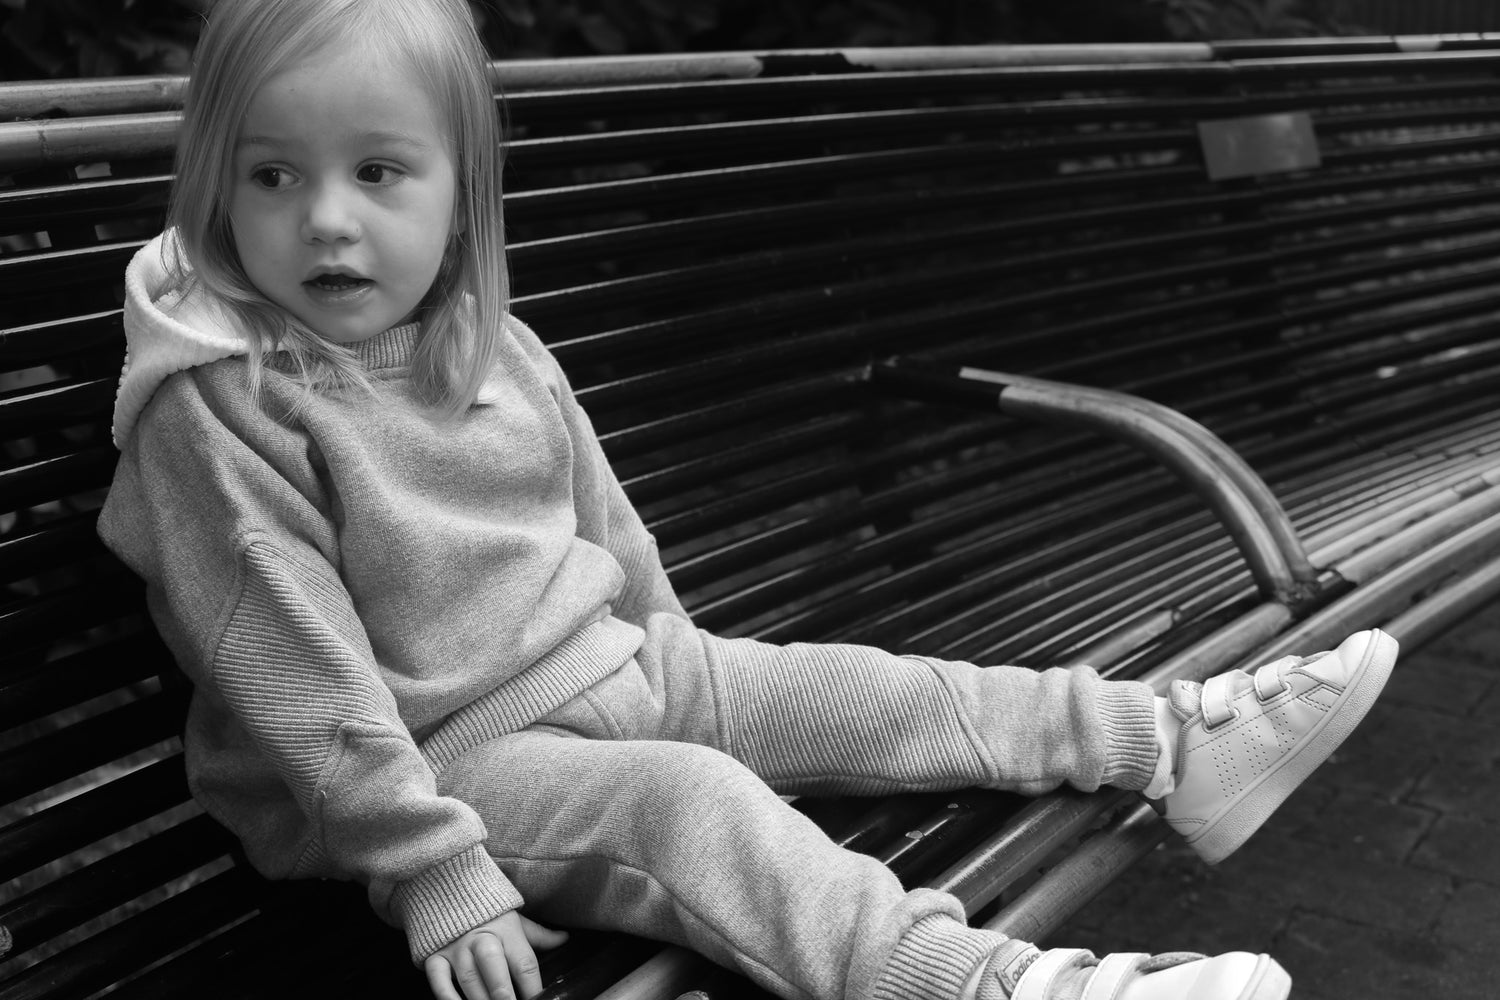 Editorial image of child wearing cosy jogger with rib detailing in organic cotton fleece, made in the uk